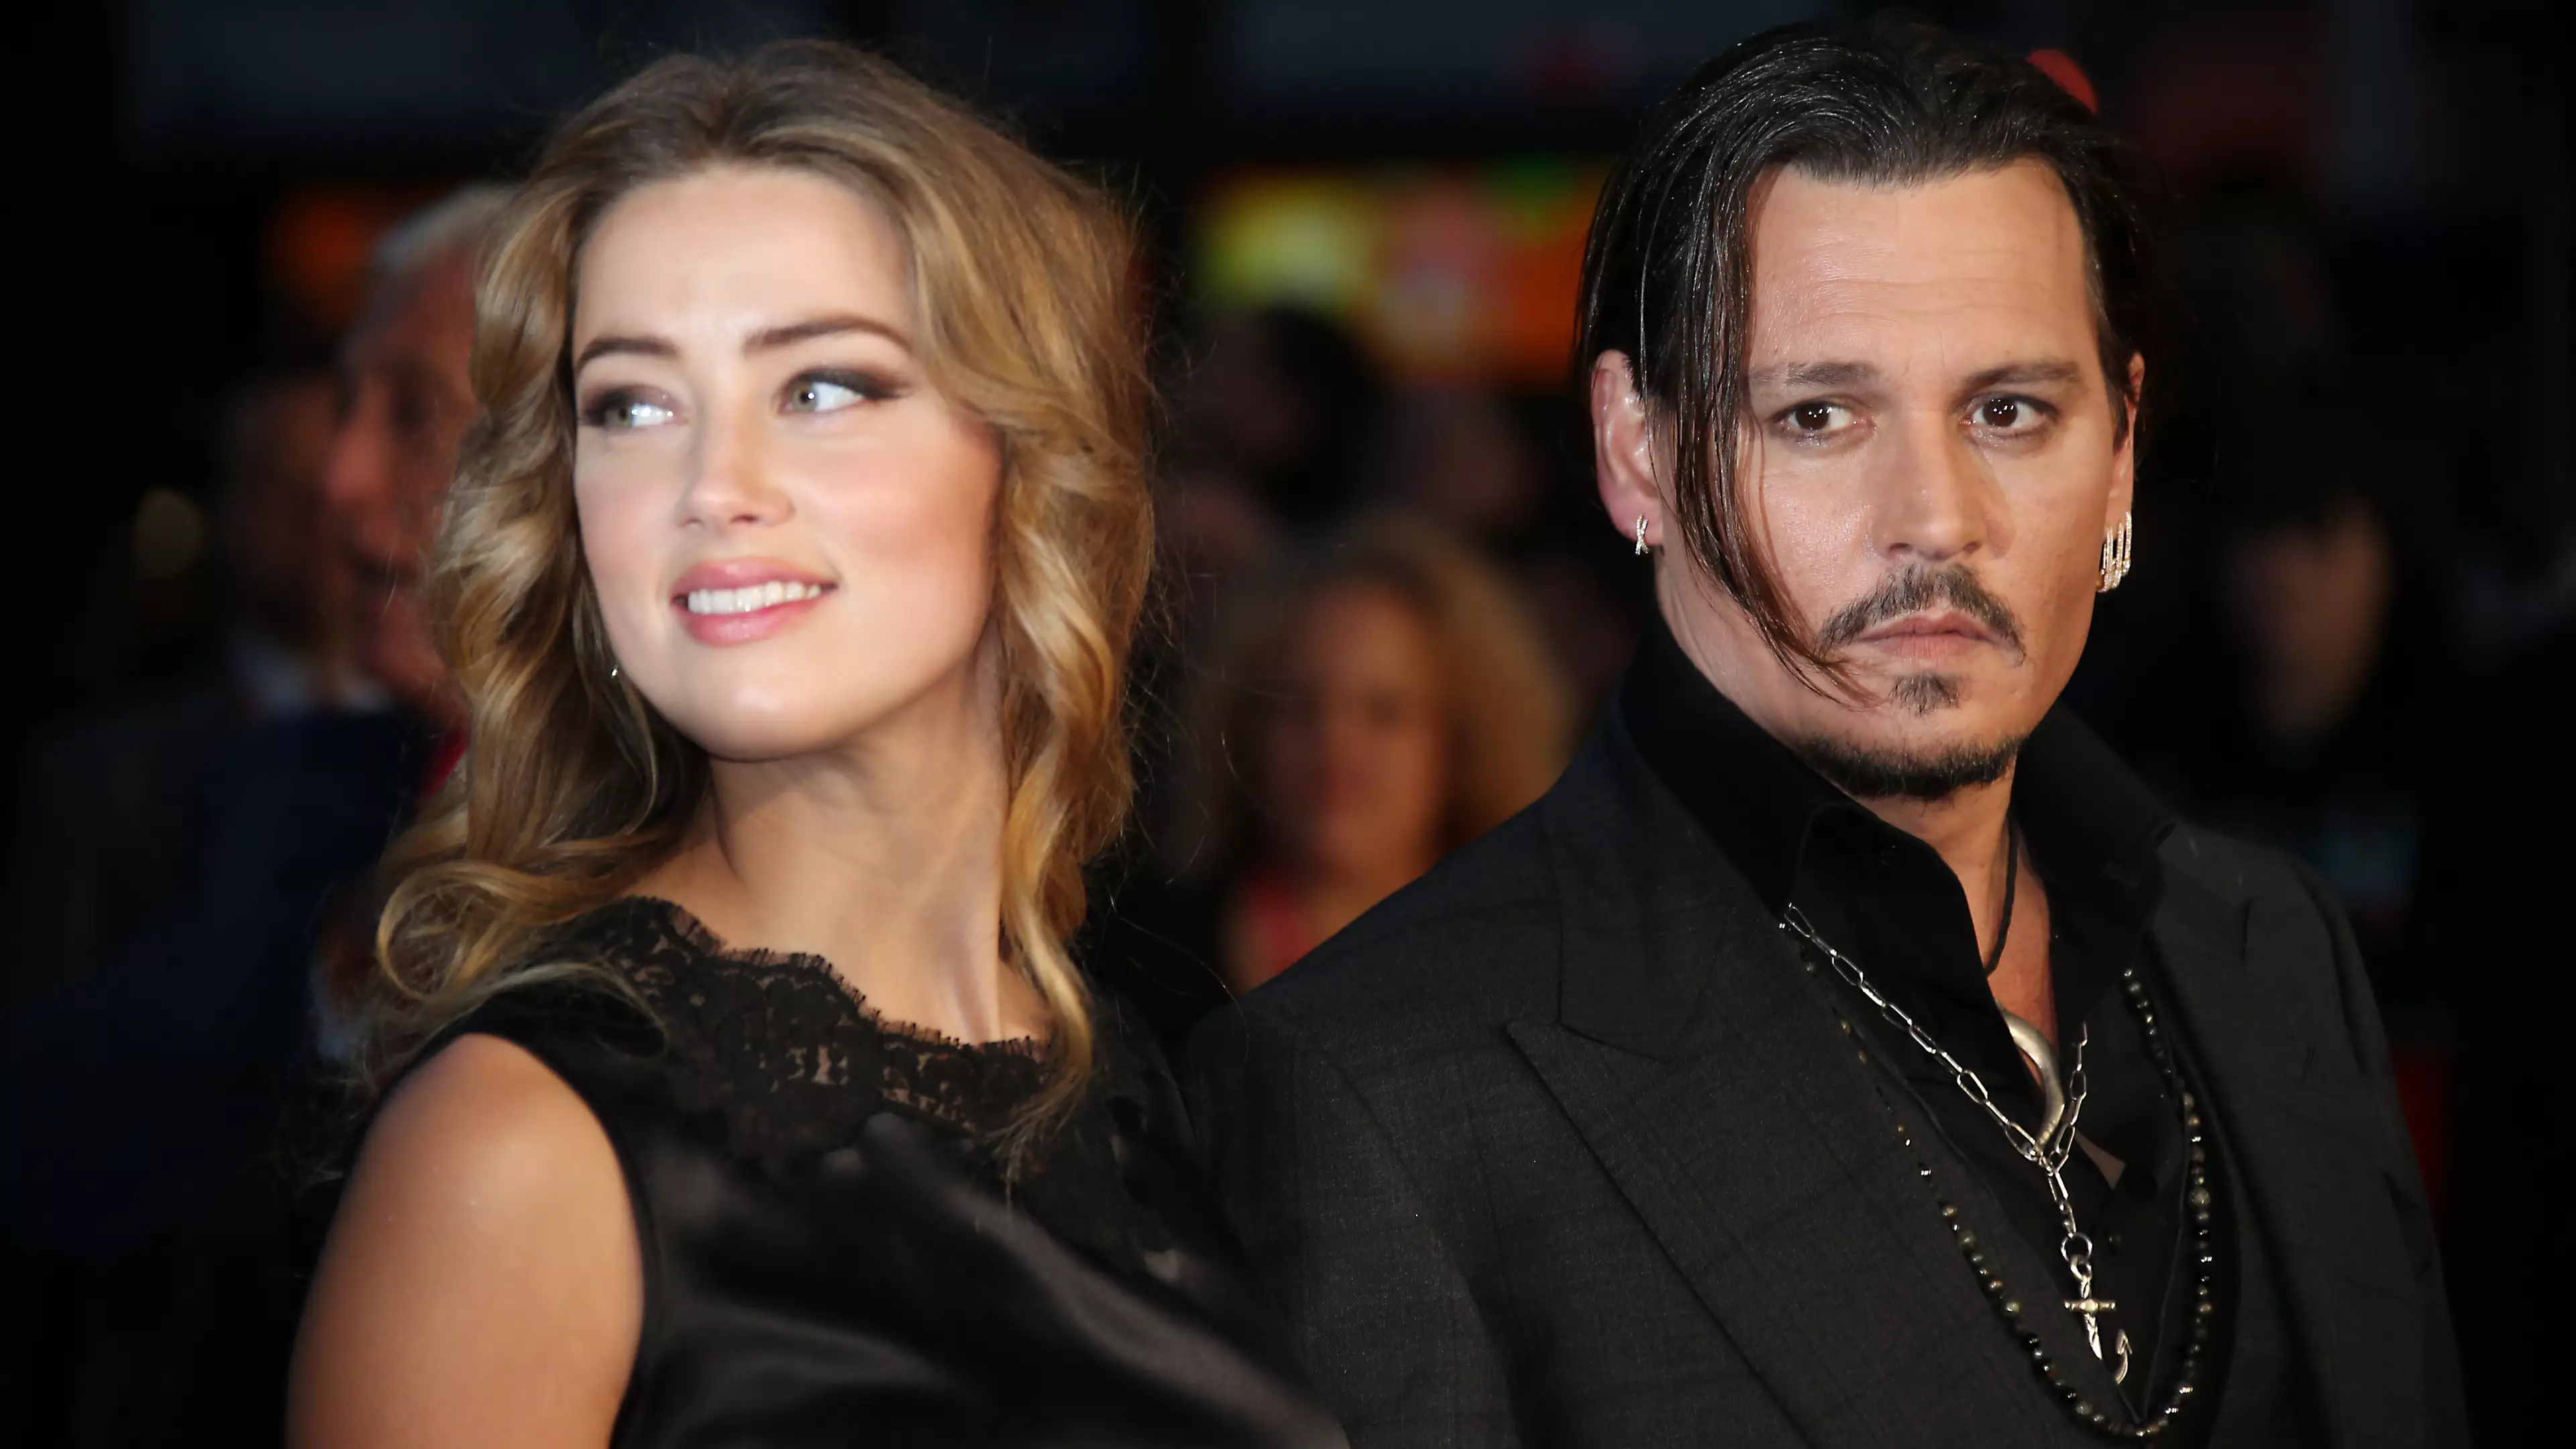 Amber Heard and Johnny Depp used to be married